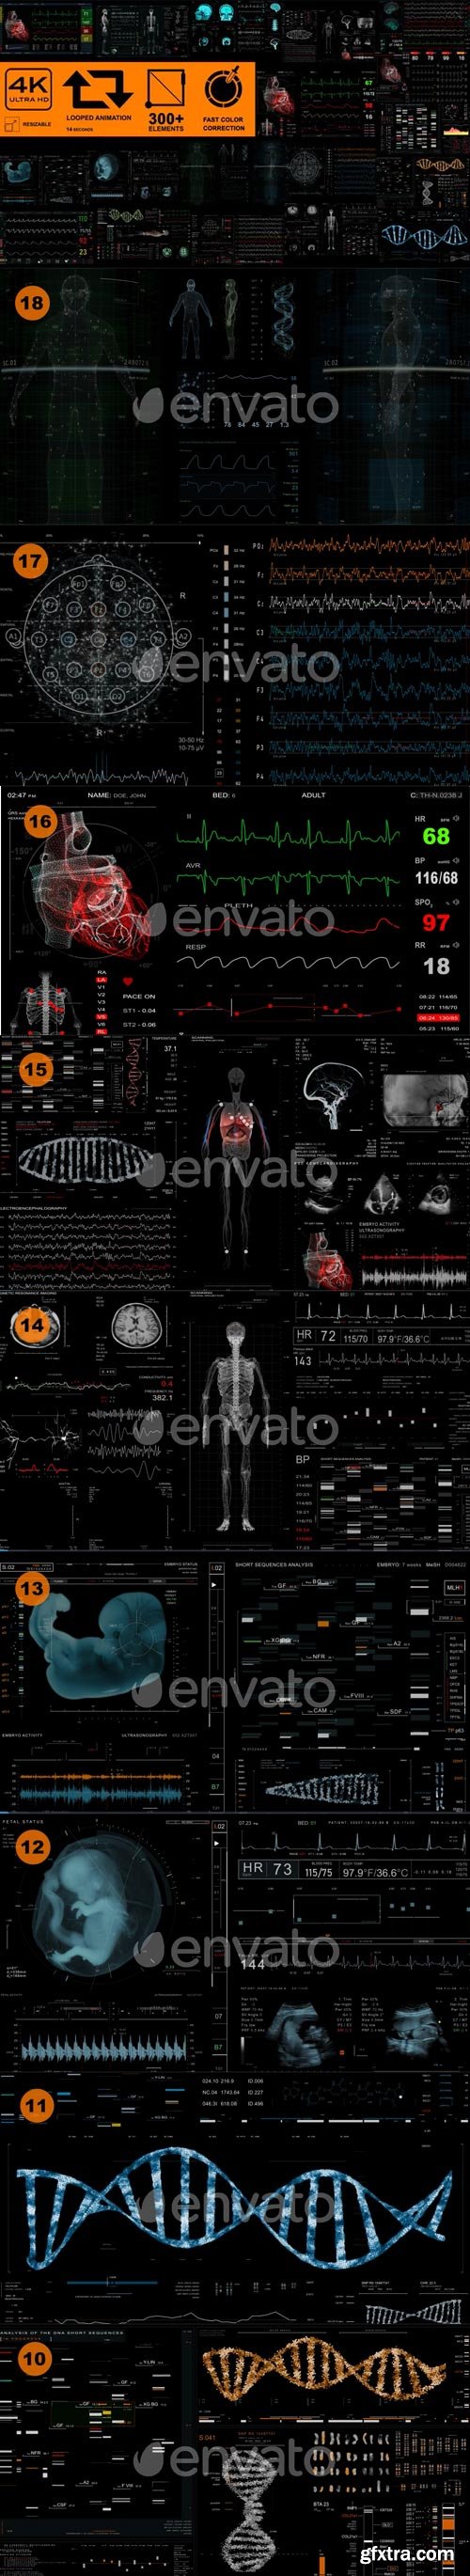 Videohive - Medical Pack 18 Screens (300+ elements) - 31030245